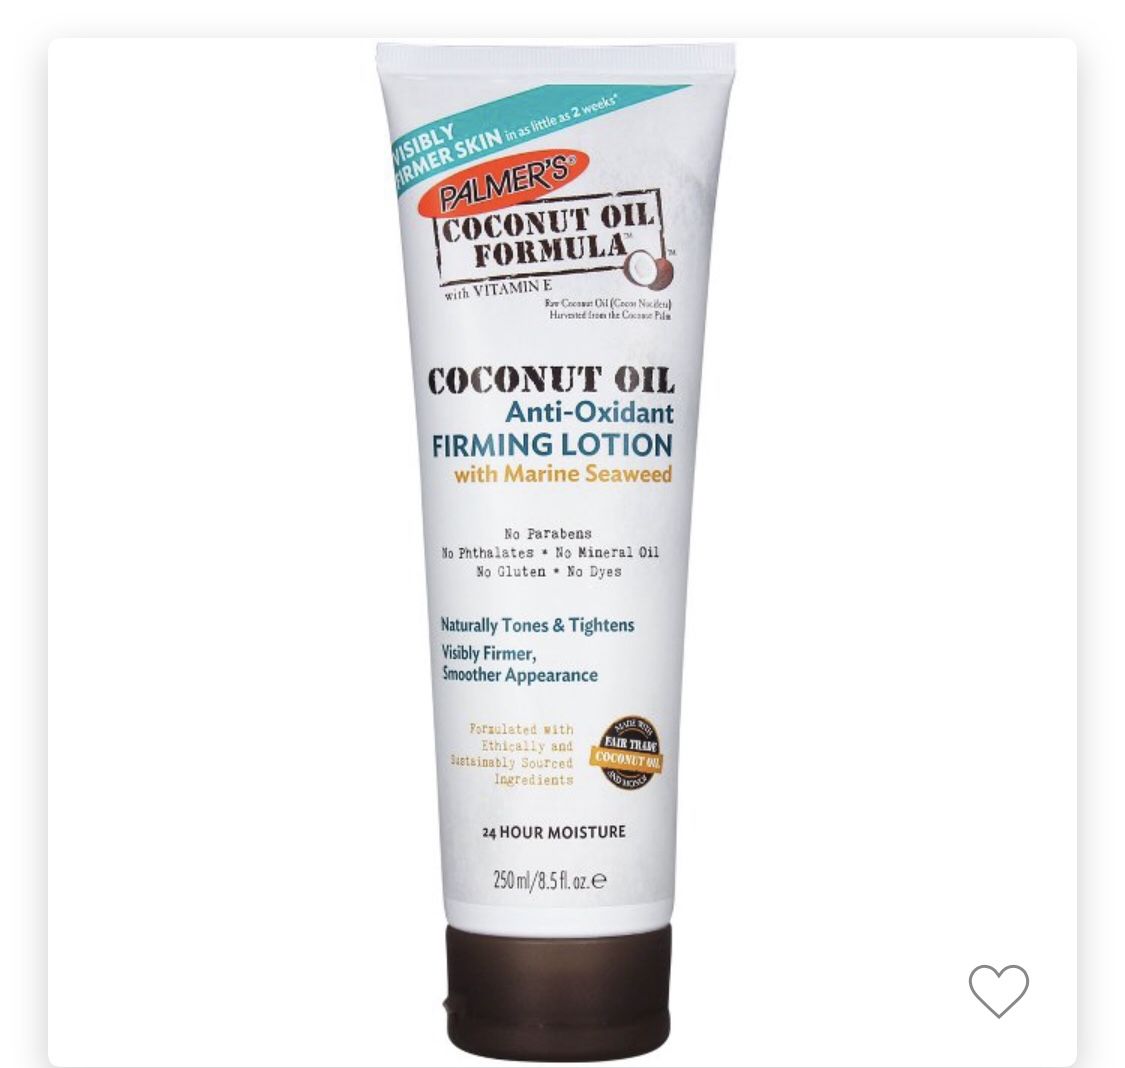 Palmer’s Coconut Oil Anti-Oxidant Firming Lotion